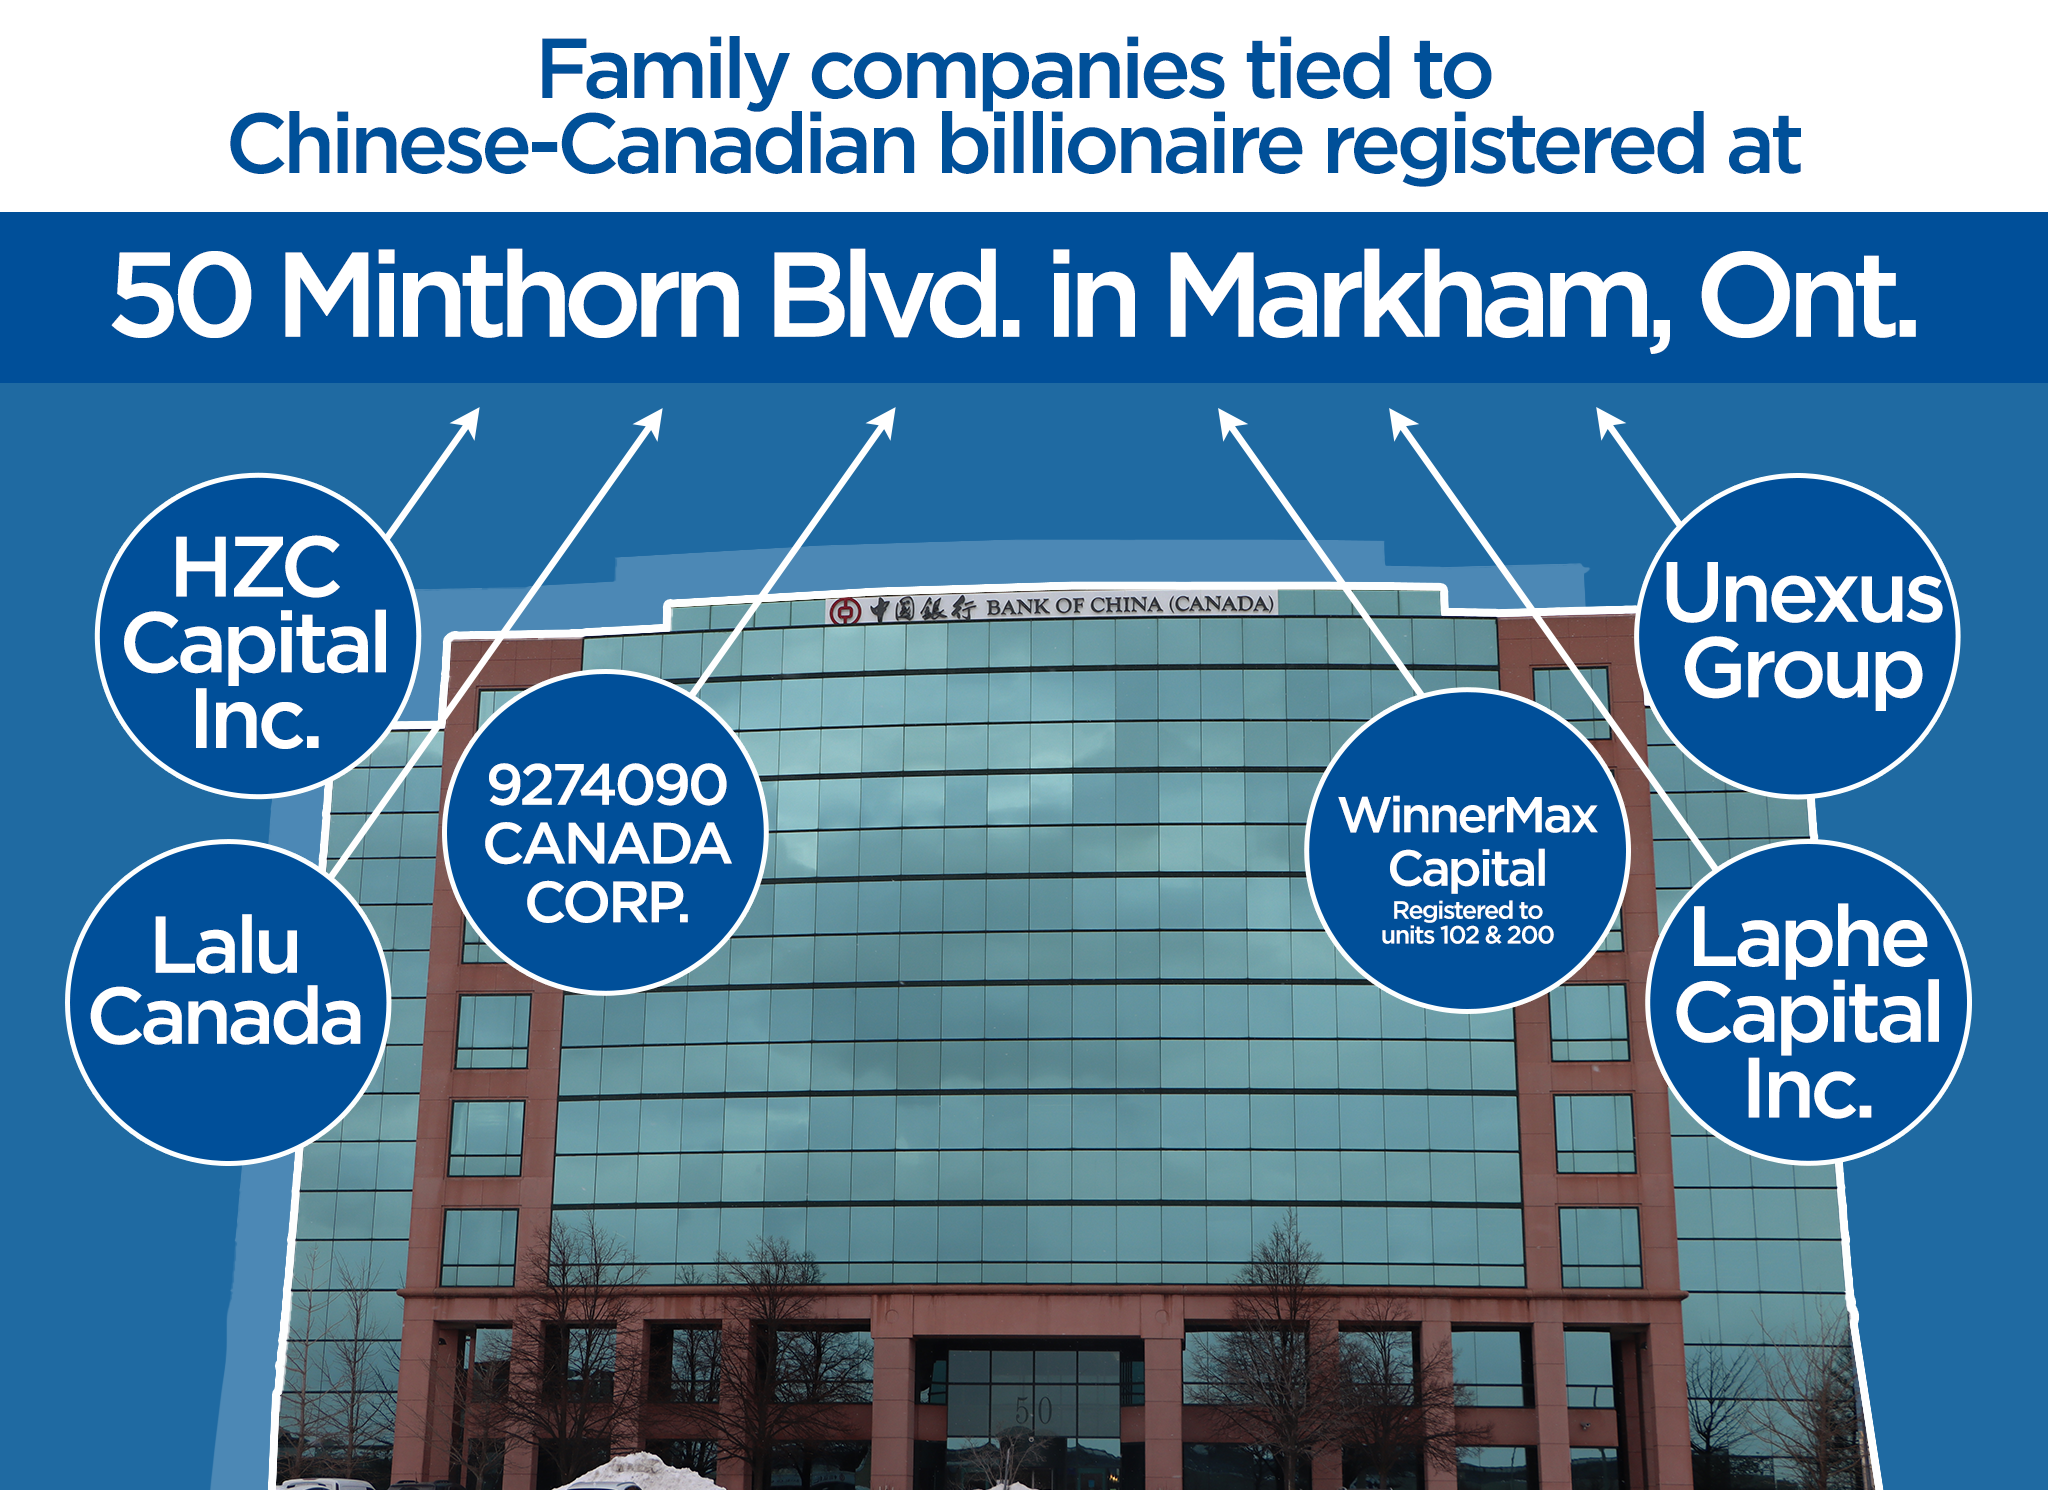 Over $154M tied to detained Chinese-Canadian oligarch invested in GTA real estate - image